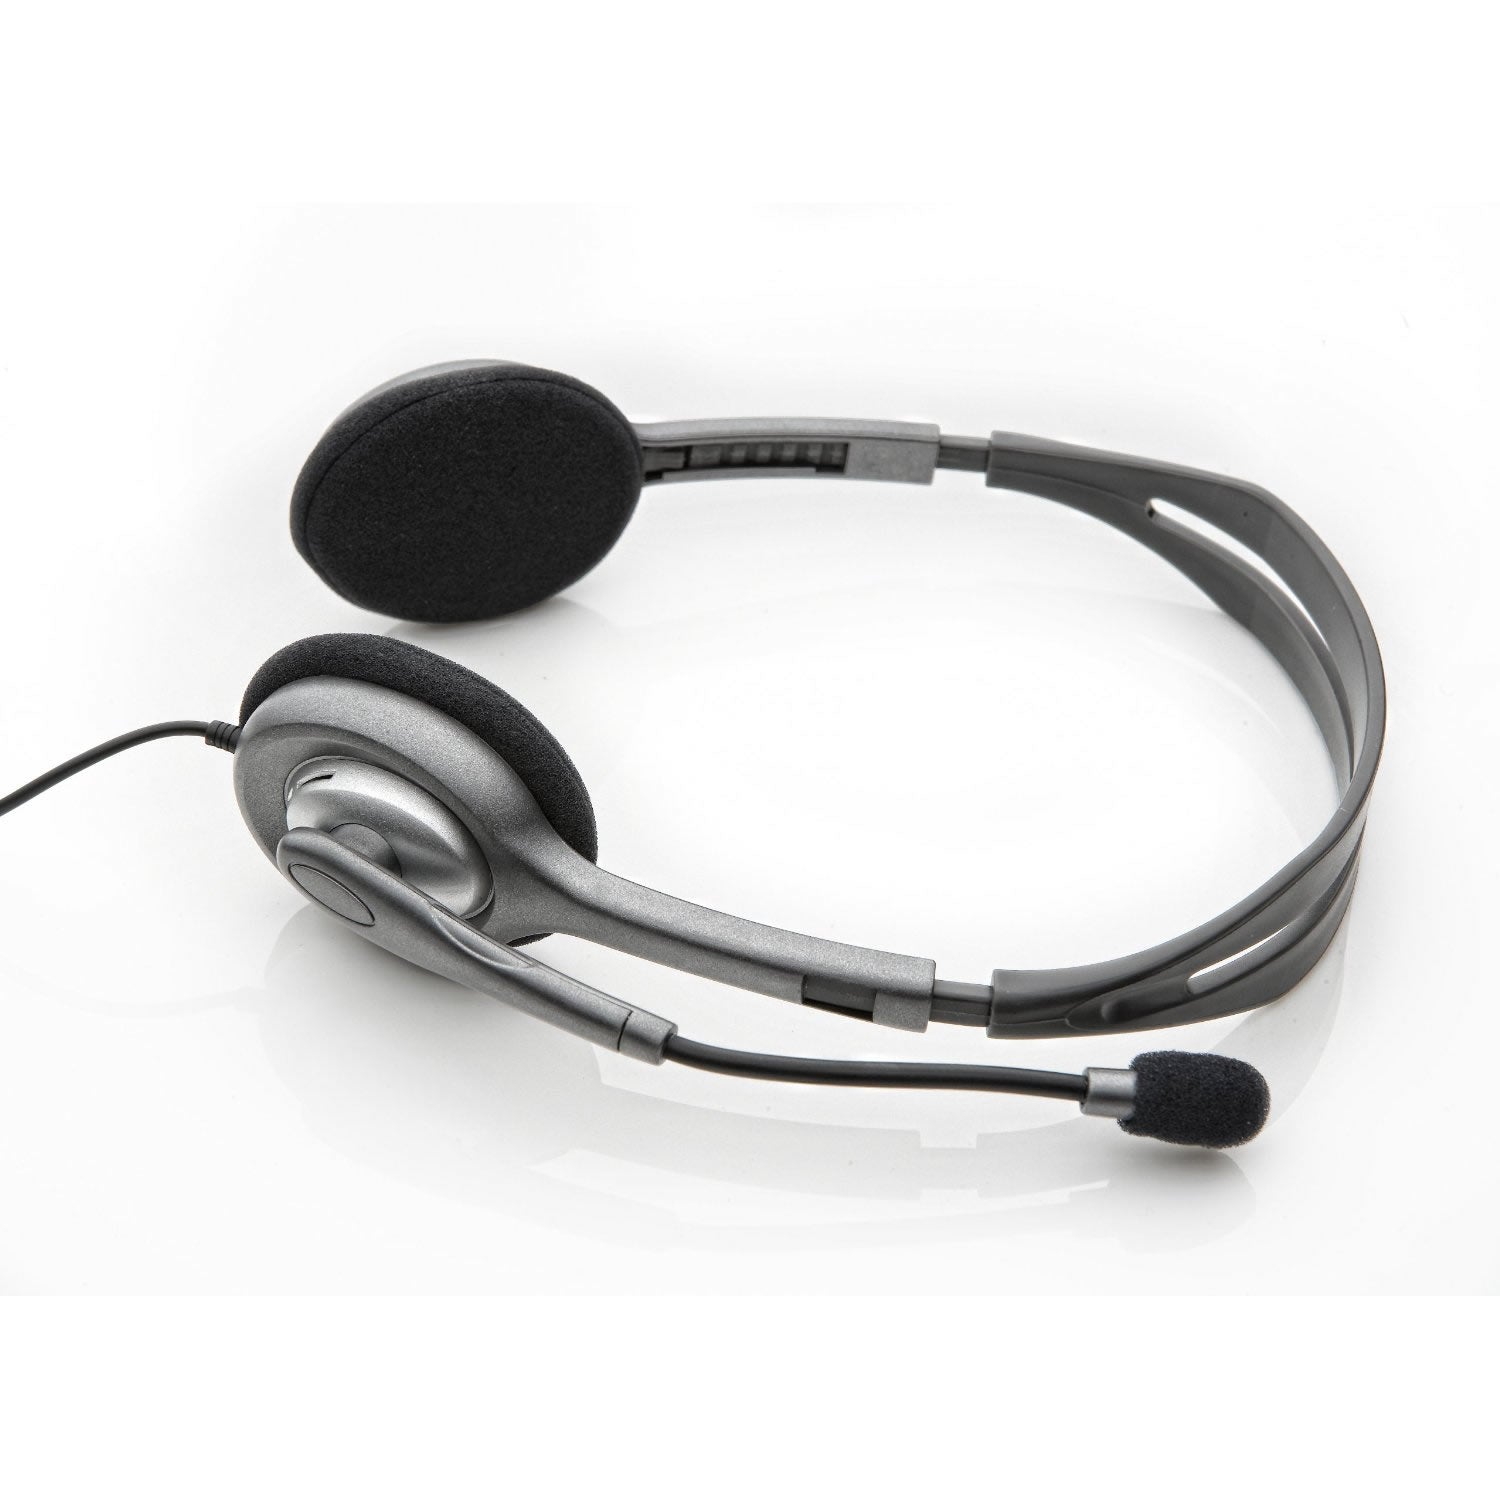 H110 Stereo Headset (981-000459)